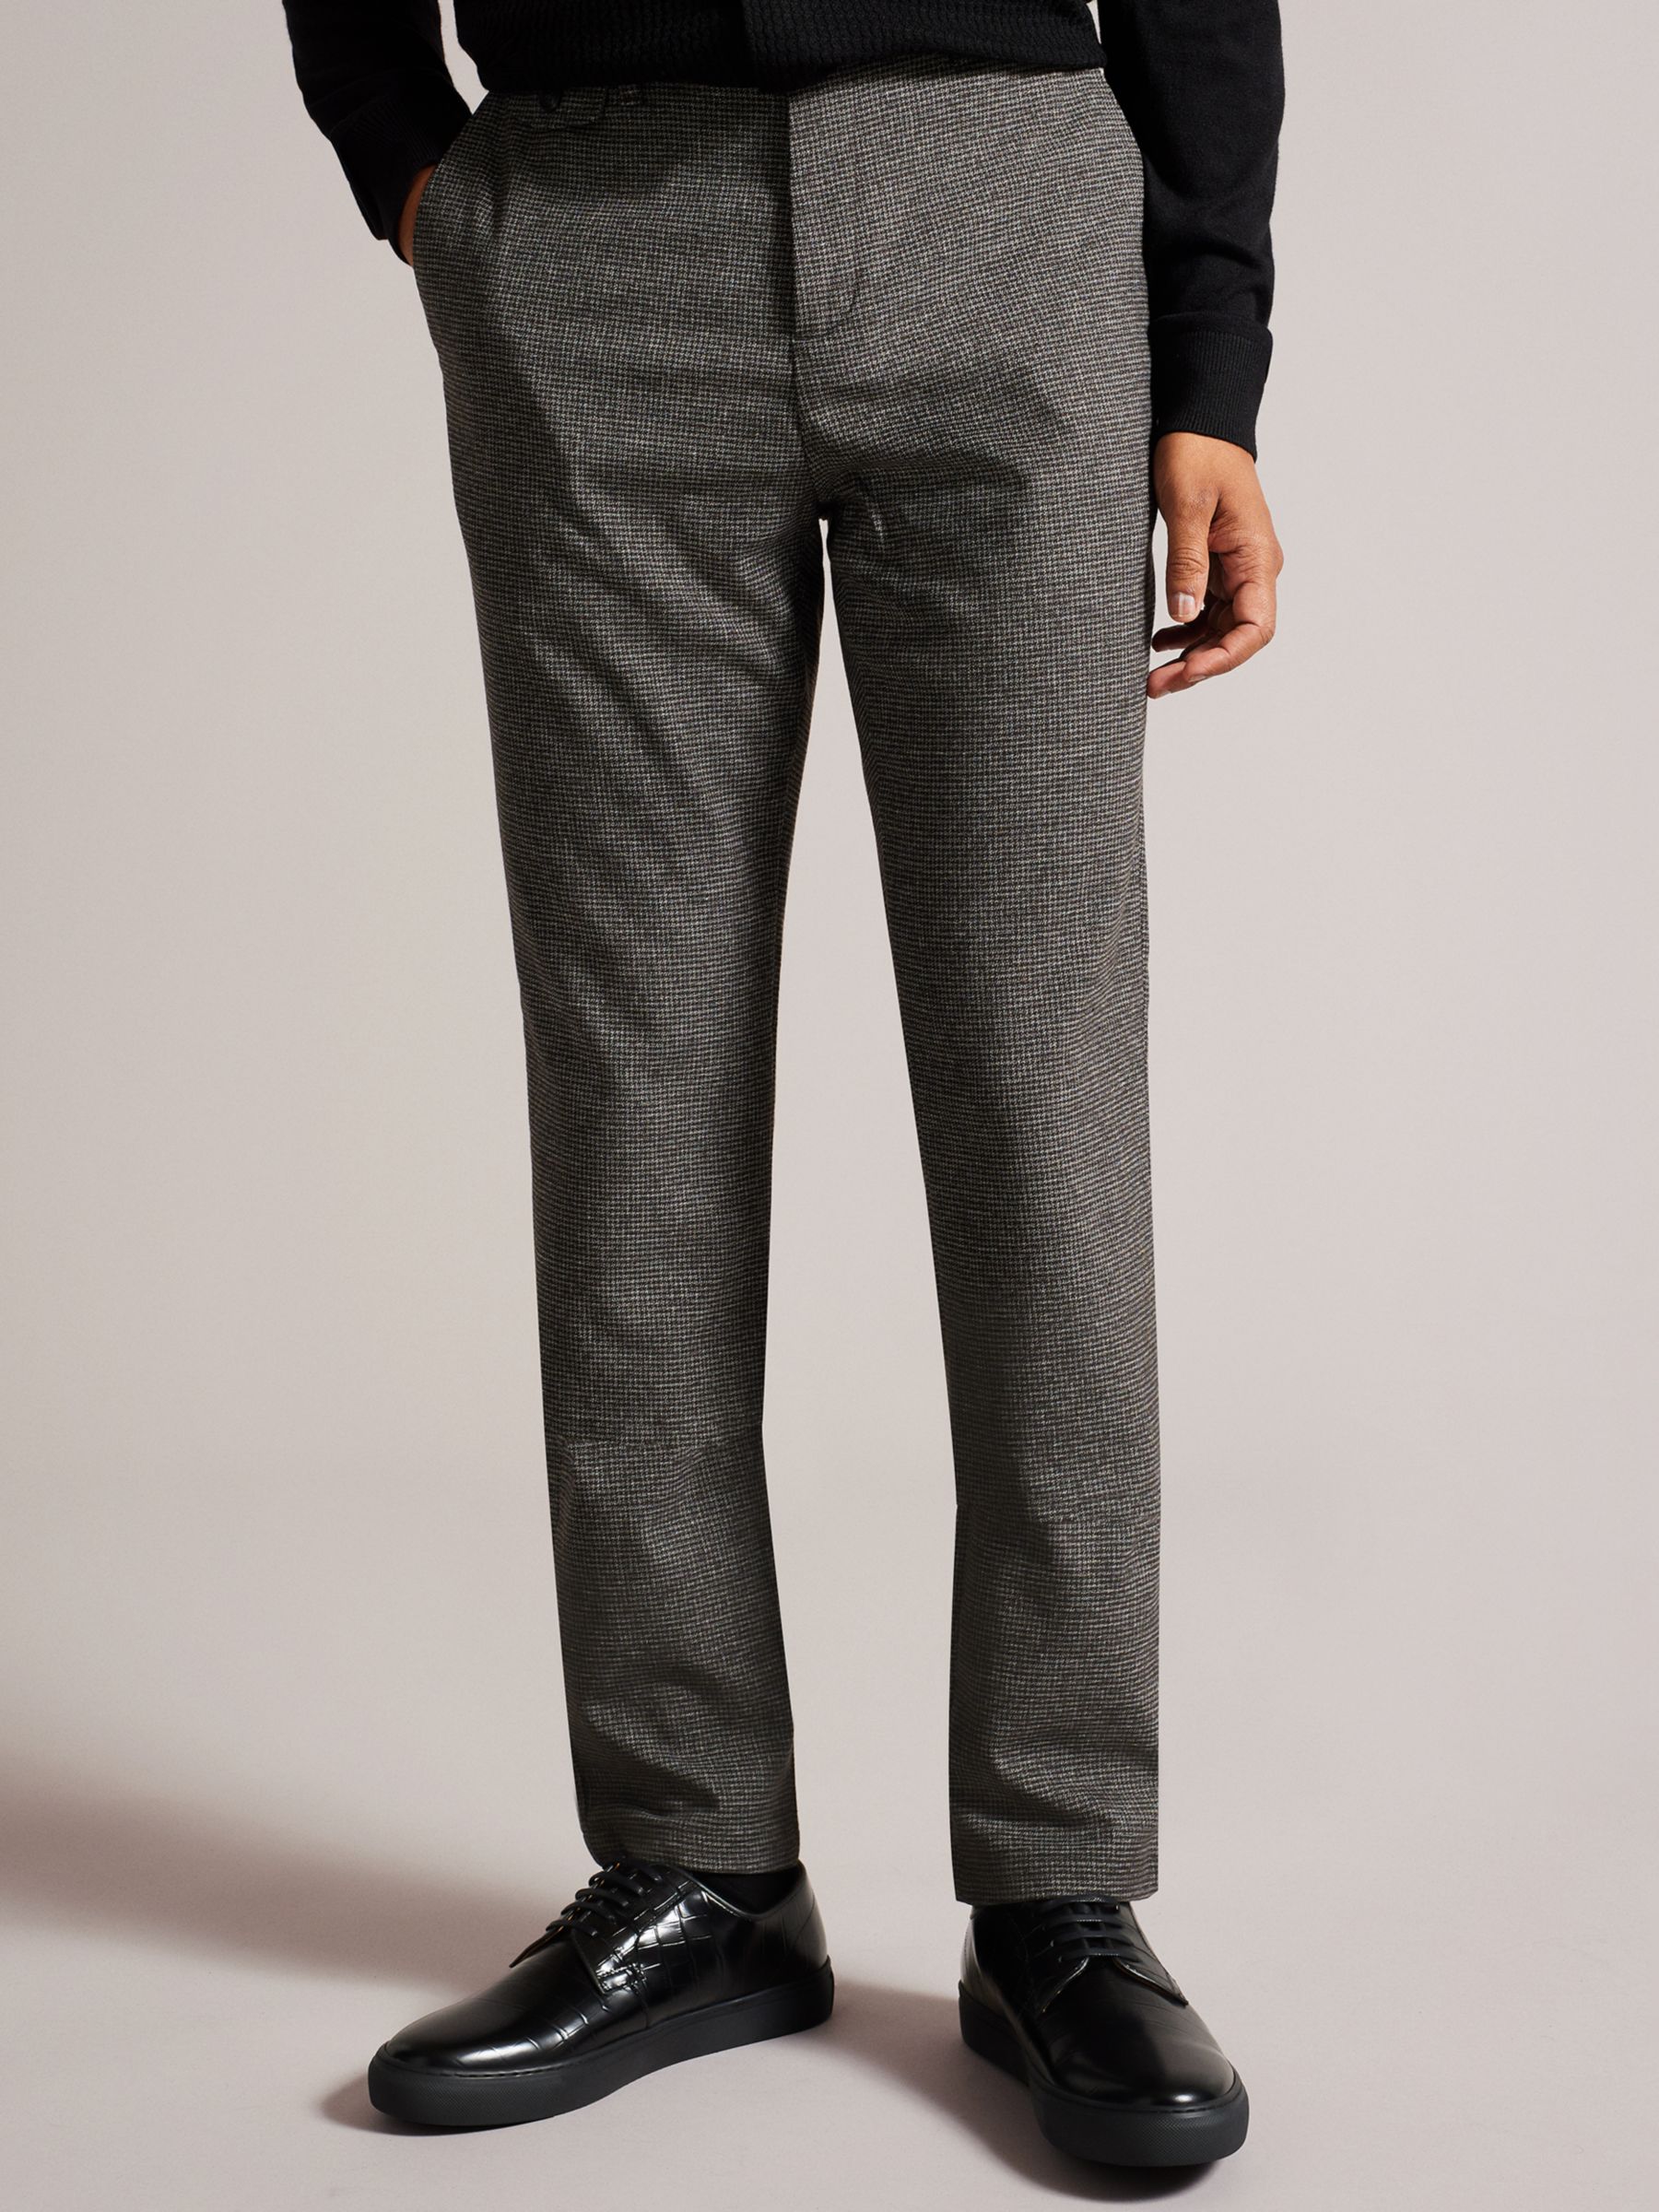 Ted Baker Ziyech Slim Fit Houndstooth Chinos, Grey Mid at John Lewis ...